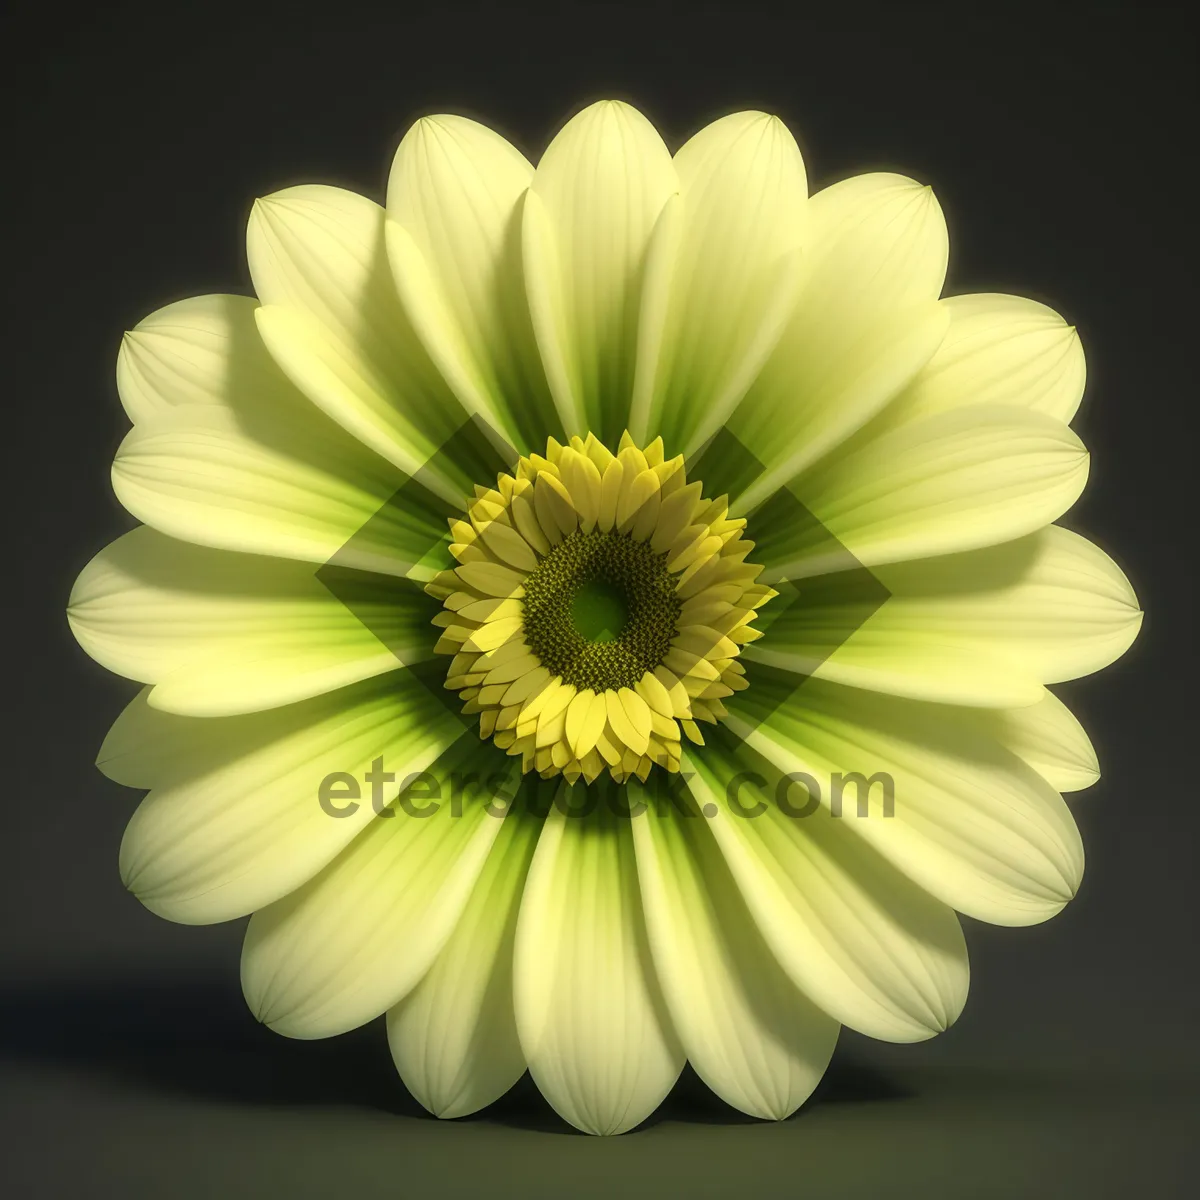 Picture of Vibrant Yellow Daisy Blooming in Garden